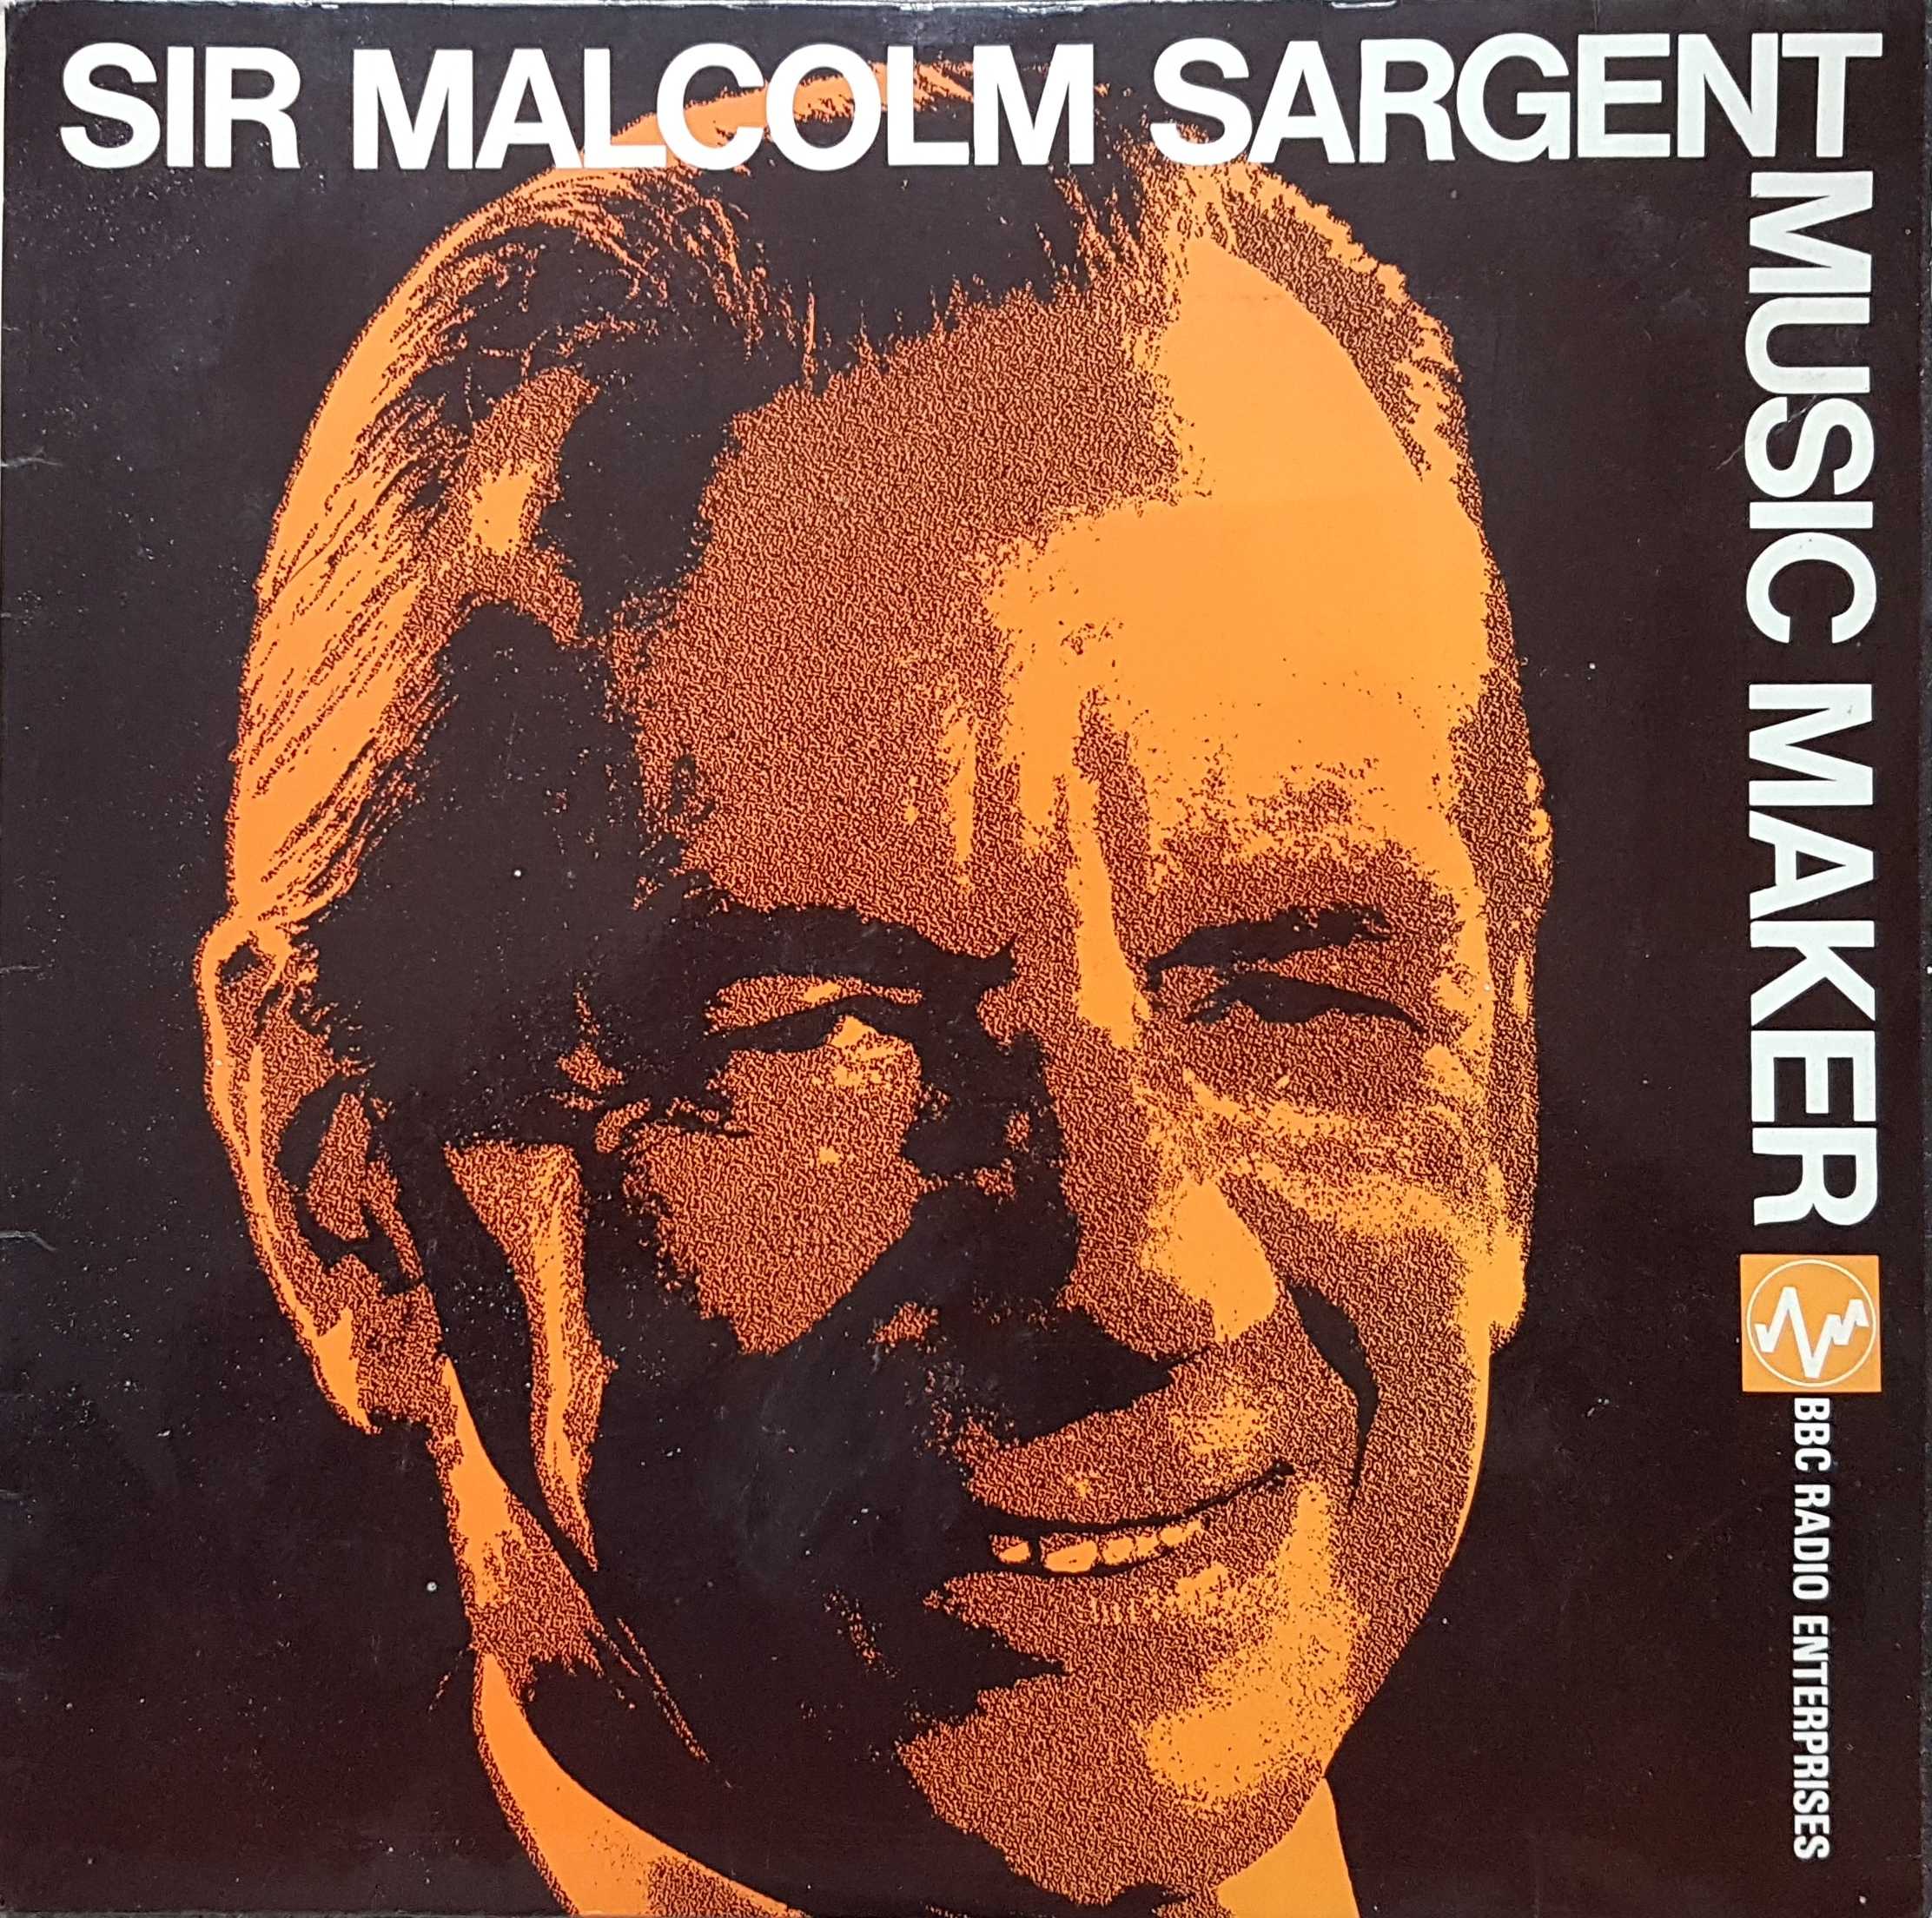 Picture of RE 10 Sir Malcolm Sargent - Music maker by artist Sir Malcolm Sargent from the BBC albums - Records and Tapes library